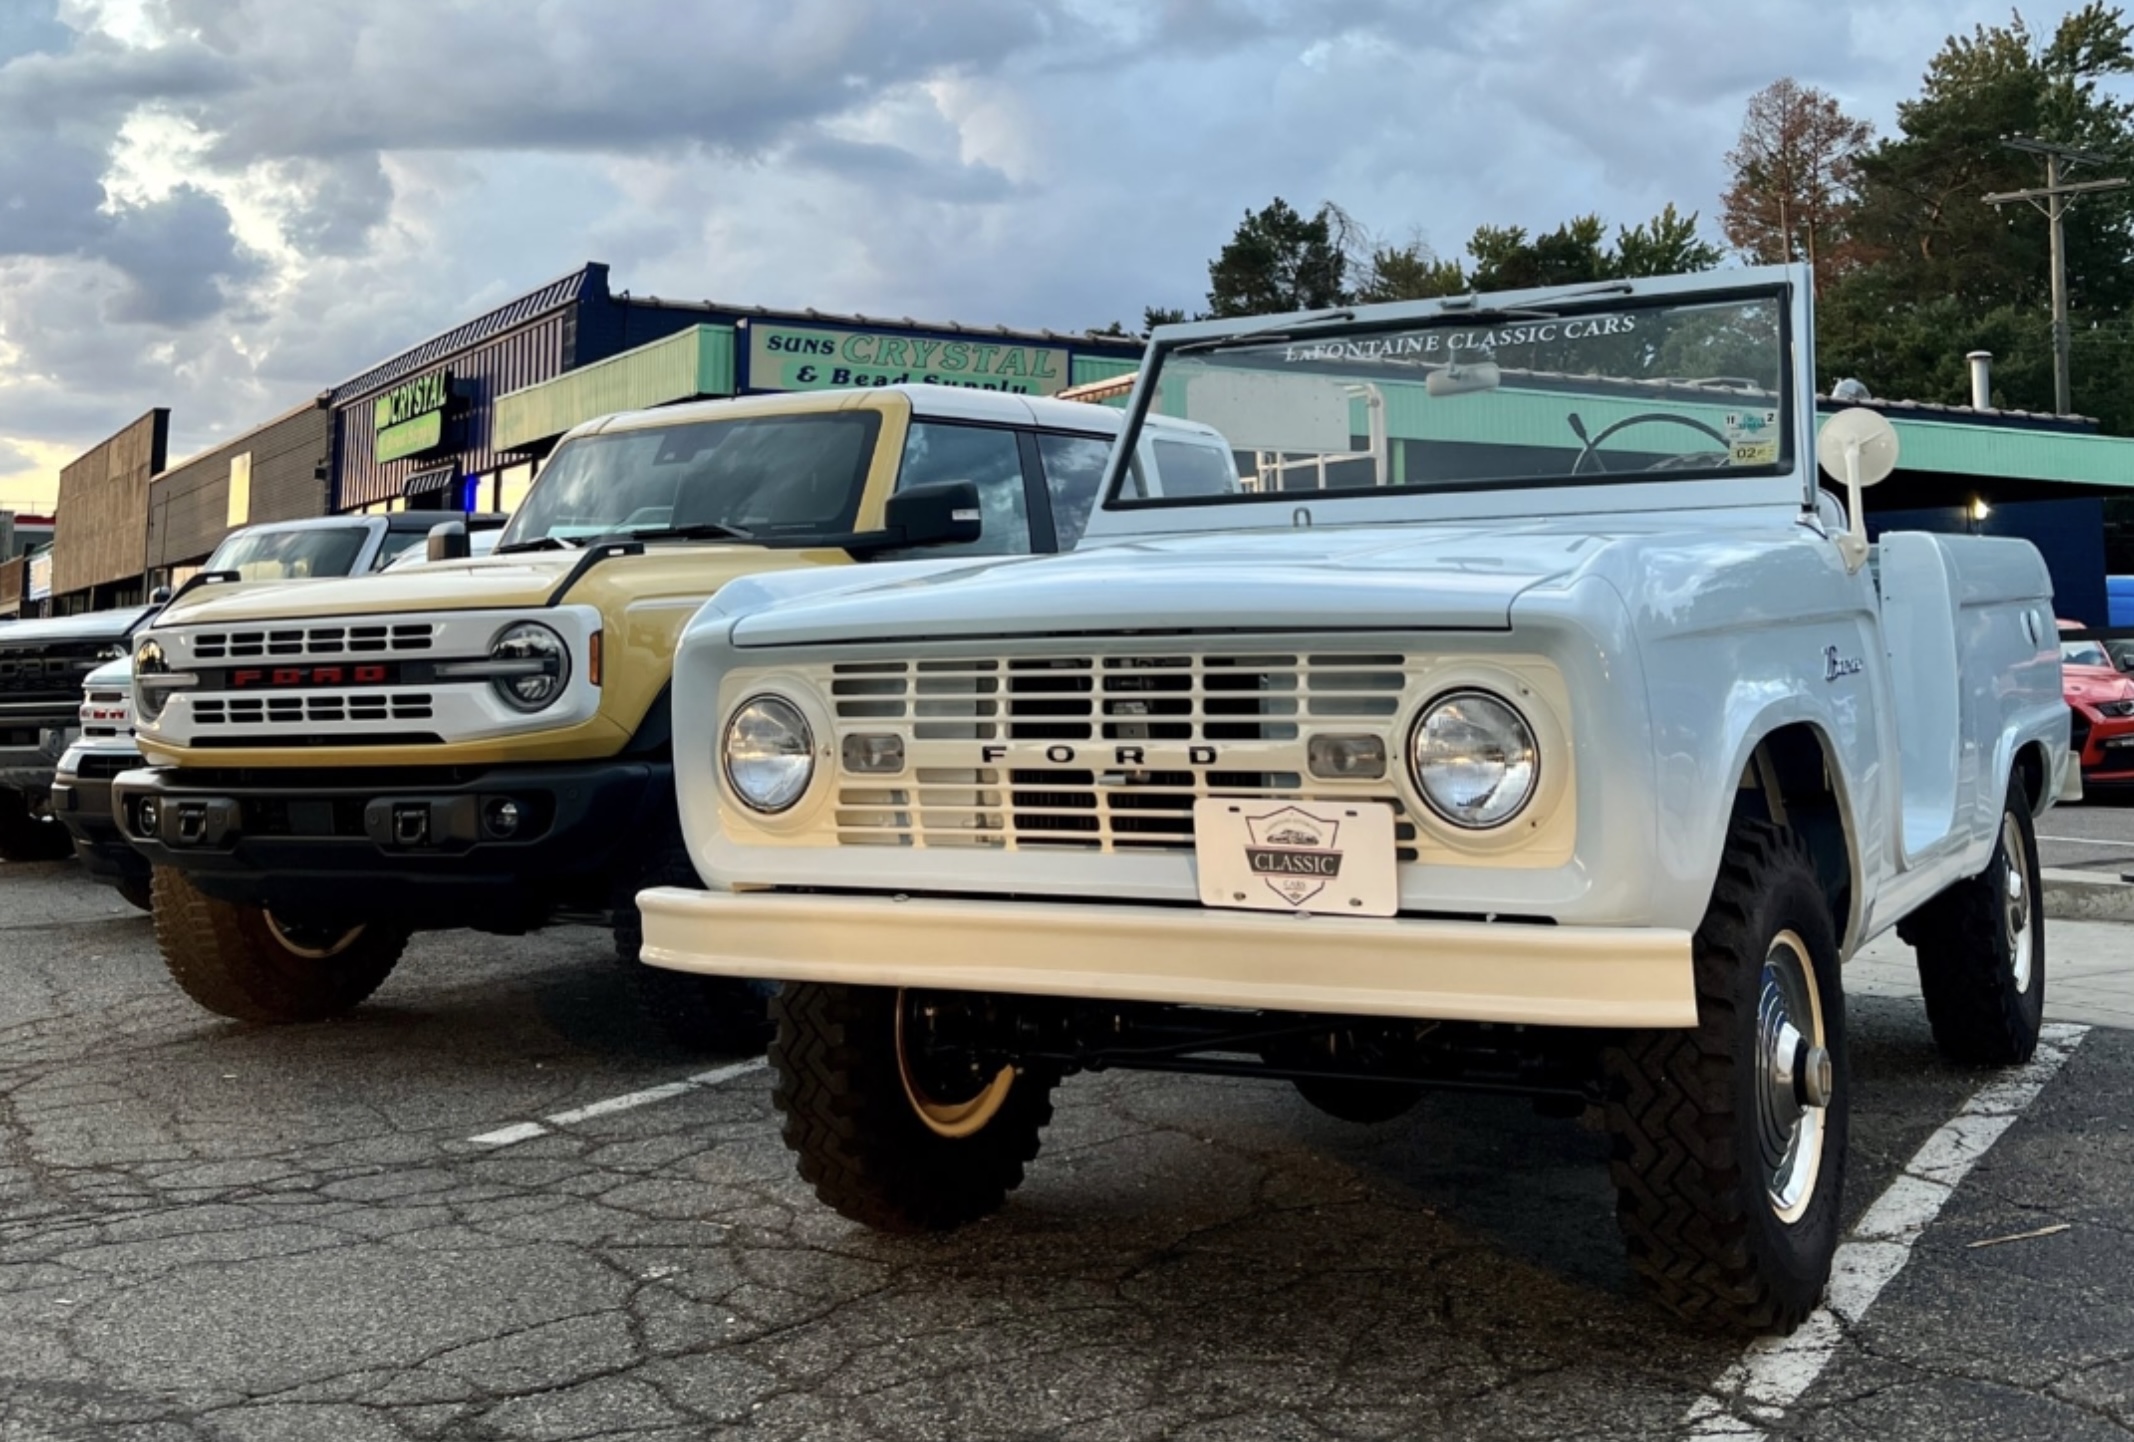 Ford Bronco Heritage Bronco (in Yellowstone Metallic) at Woodward Dream Cruise Screen Shot 2022-08-18 at 9.19.30 PM